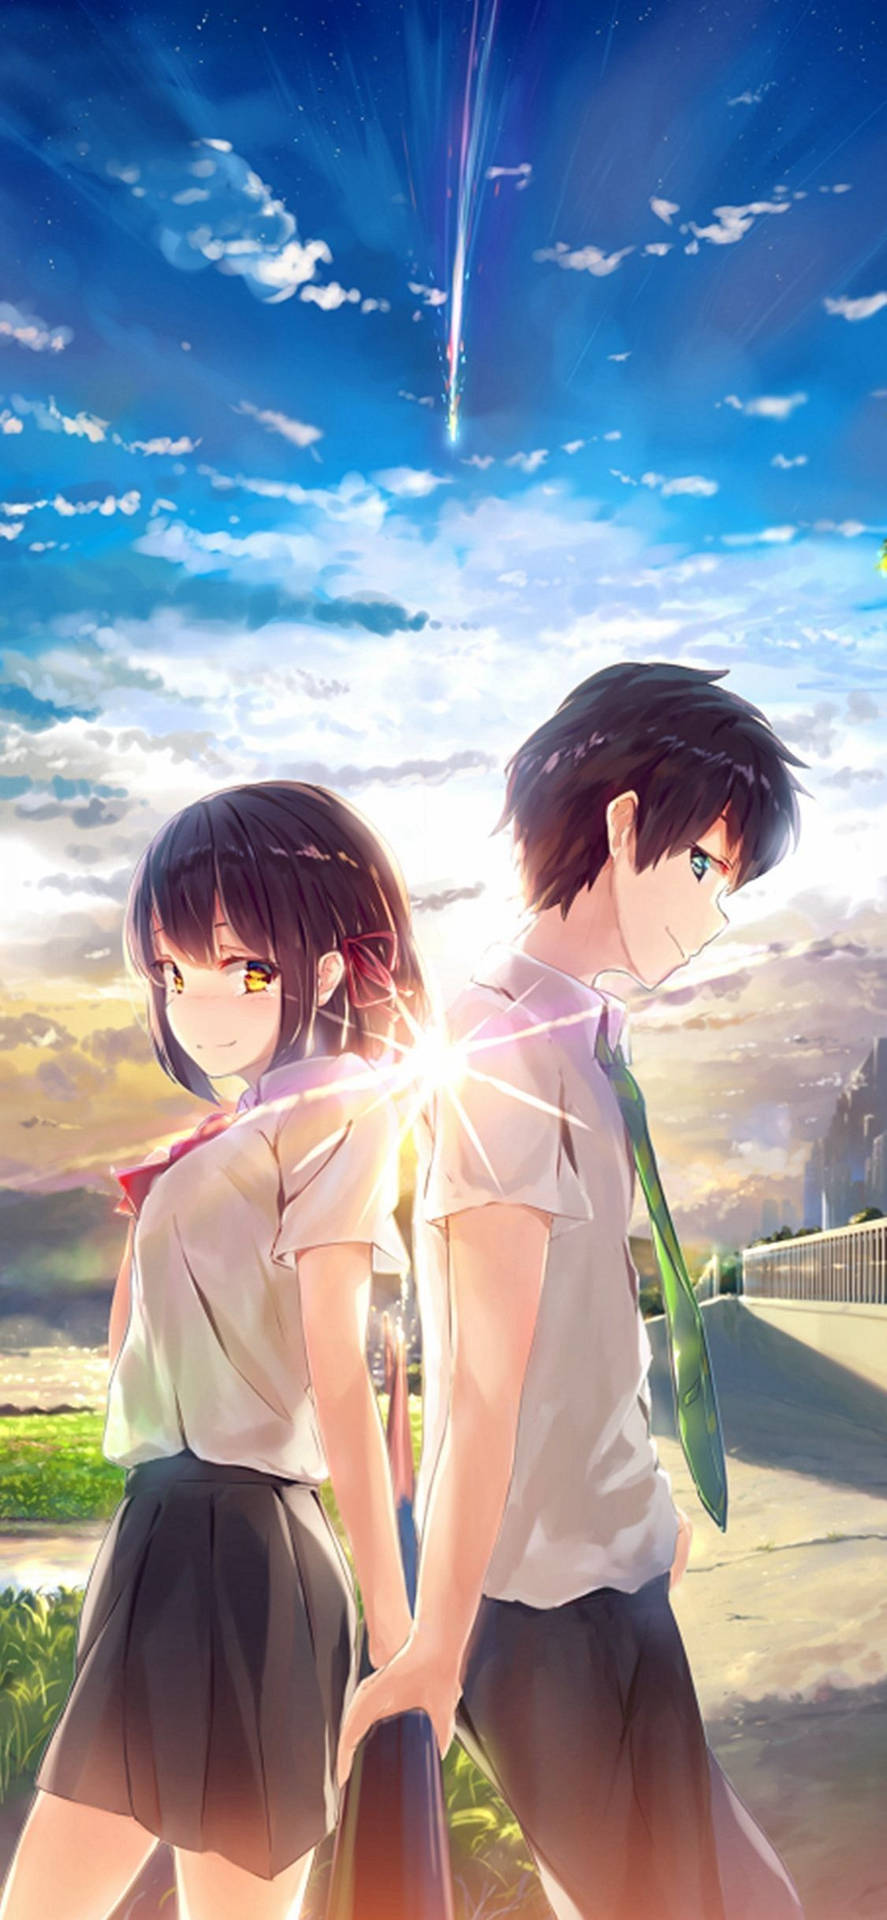 Your Name Iphone Wallpaper